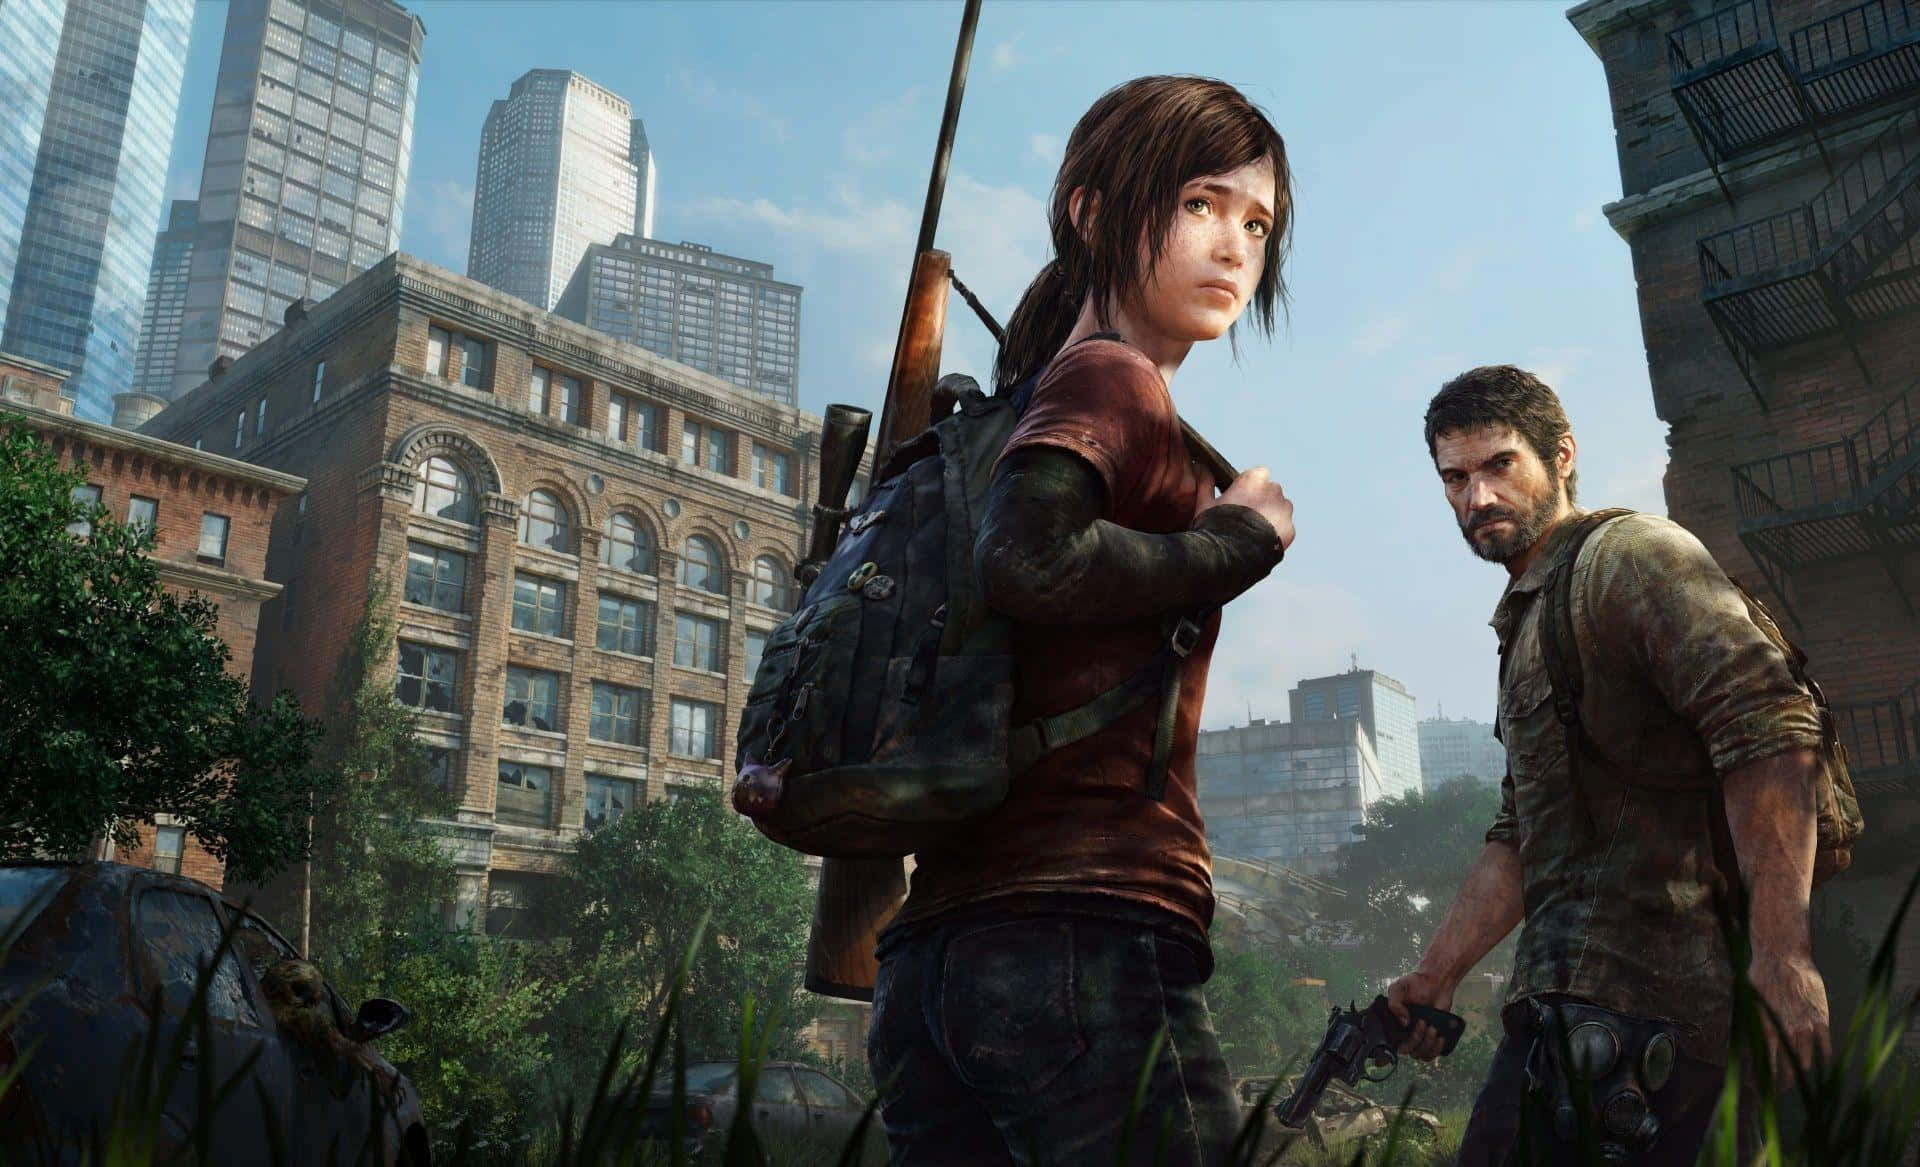 Ellie and Joel amid the post-apocalyptic world in The Last of Us